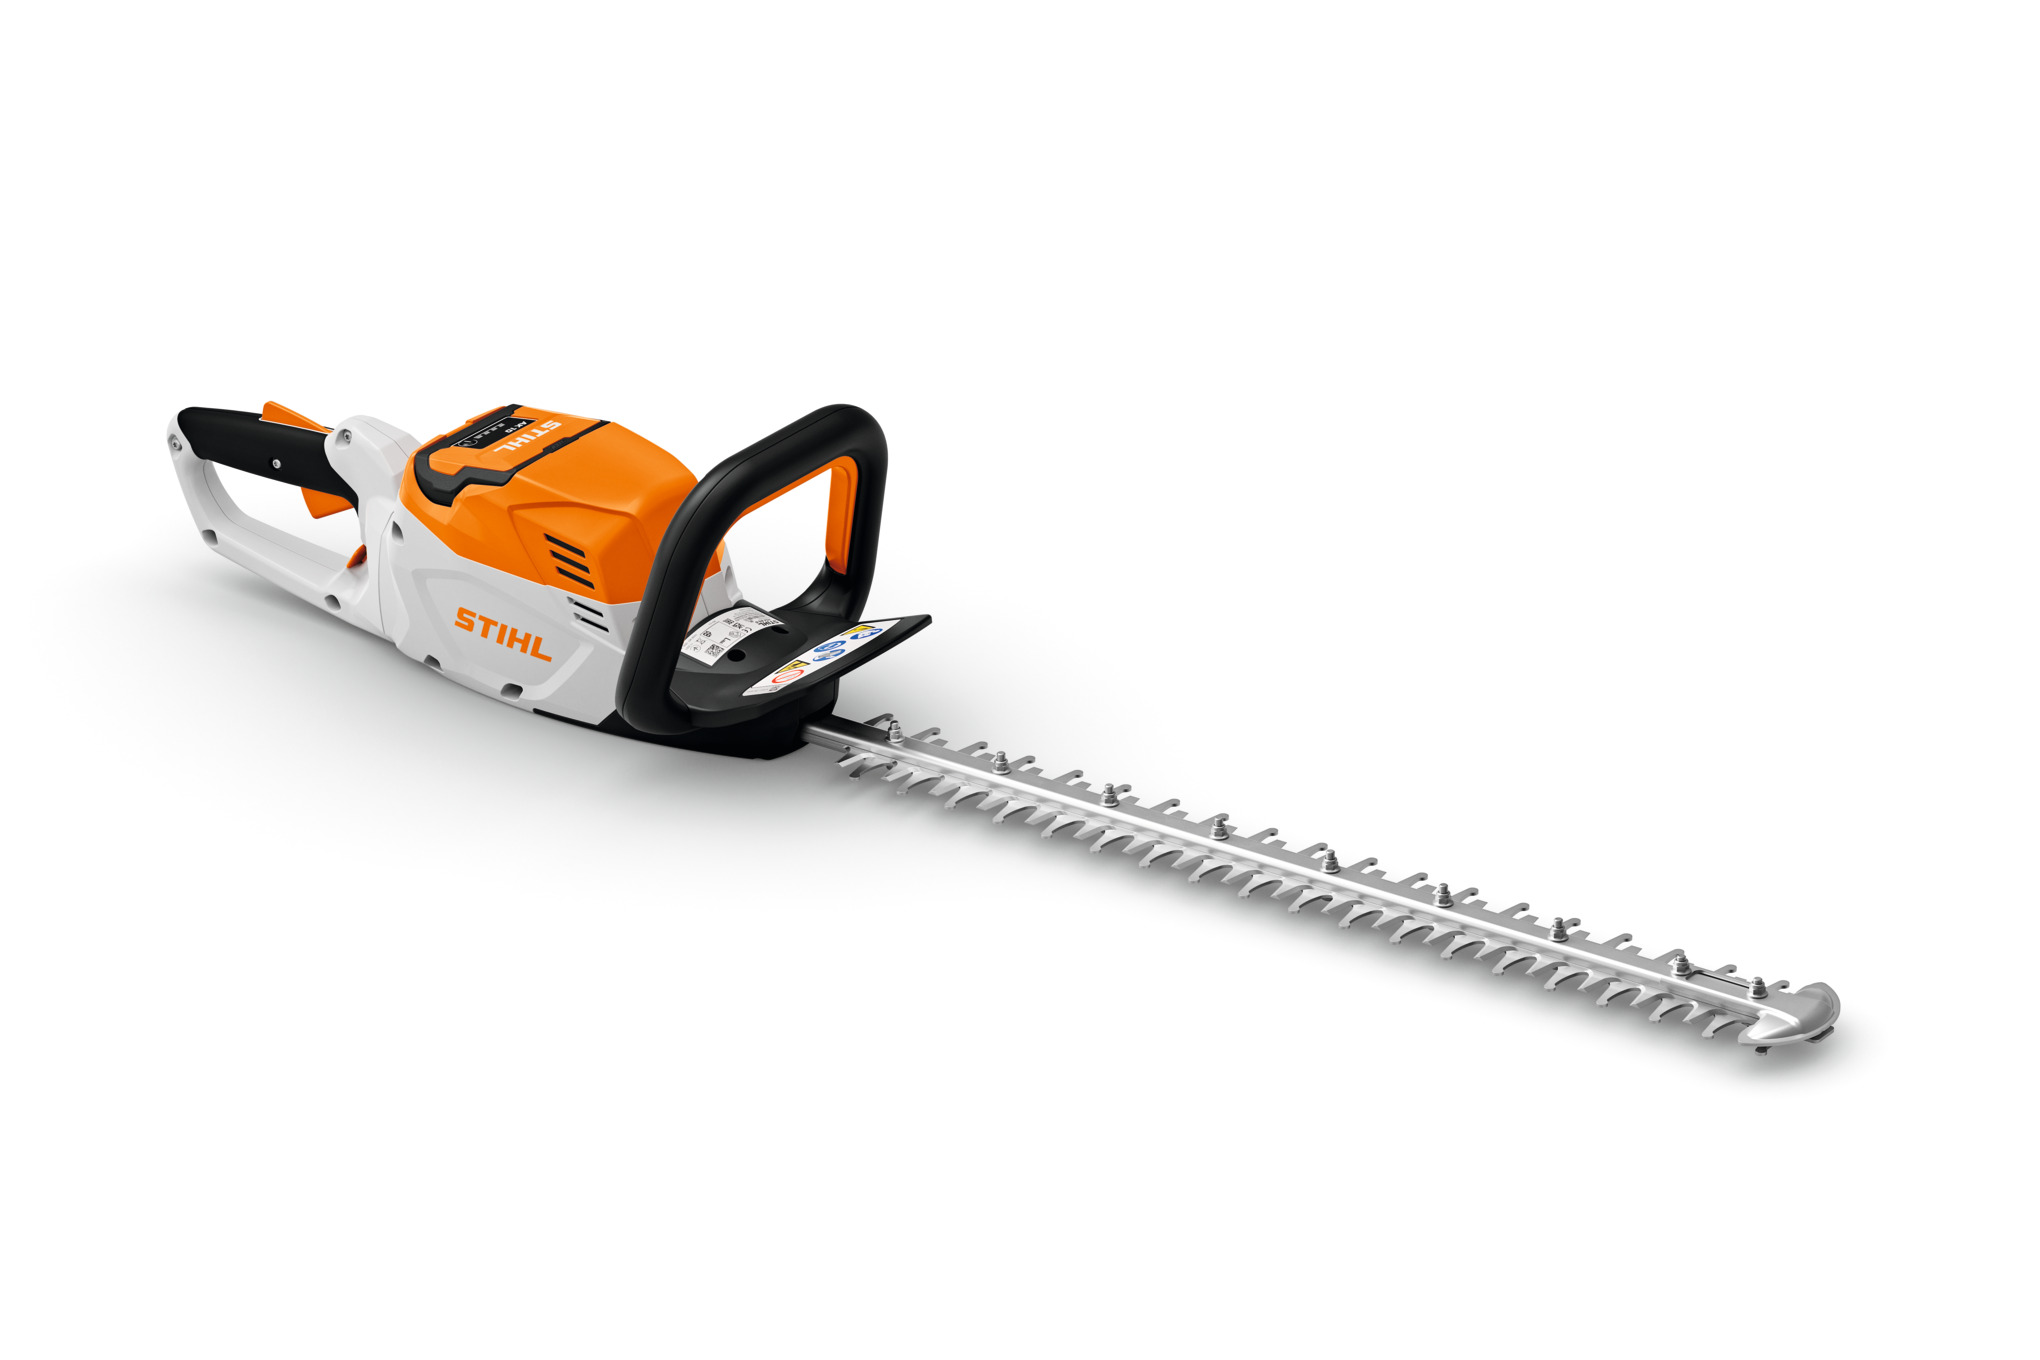 HSA 60 Battery Hedge Trimmer with AK 10 Battery & AL 101 Charger